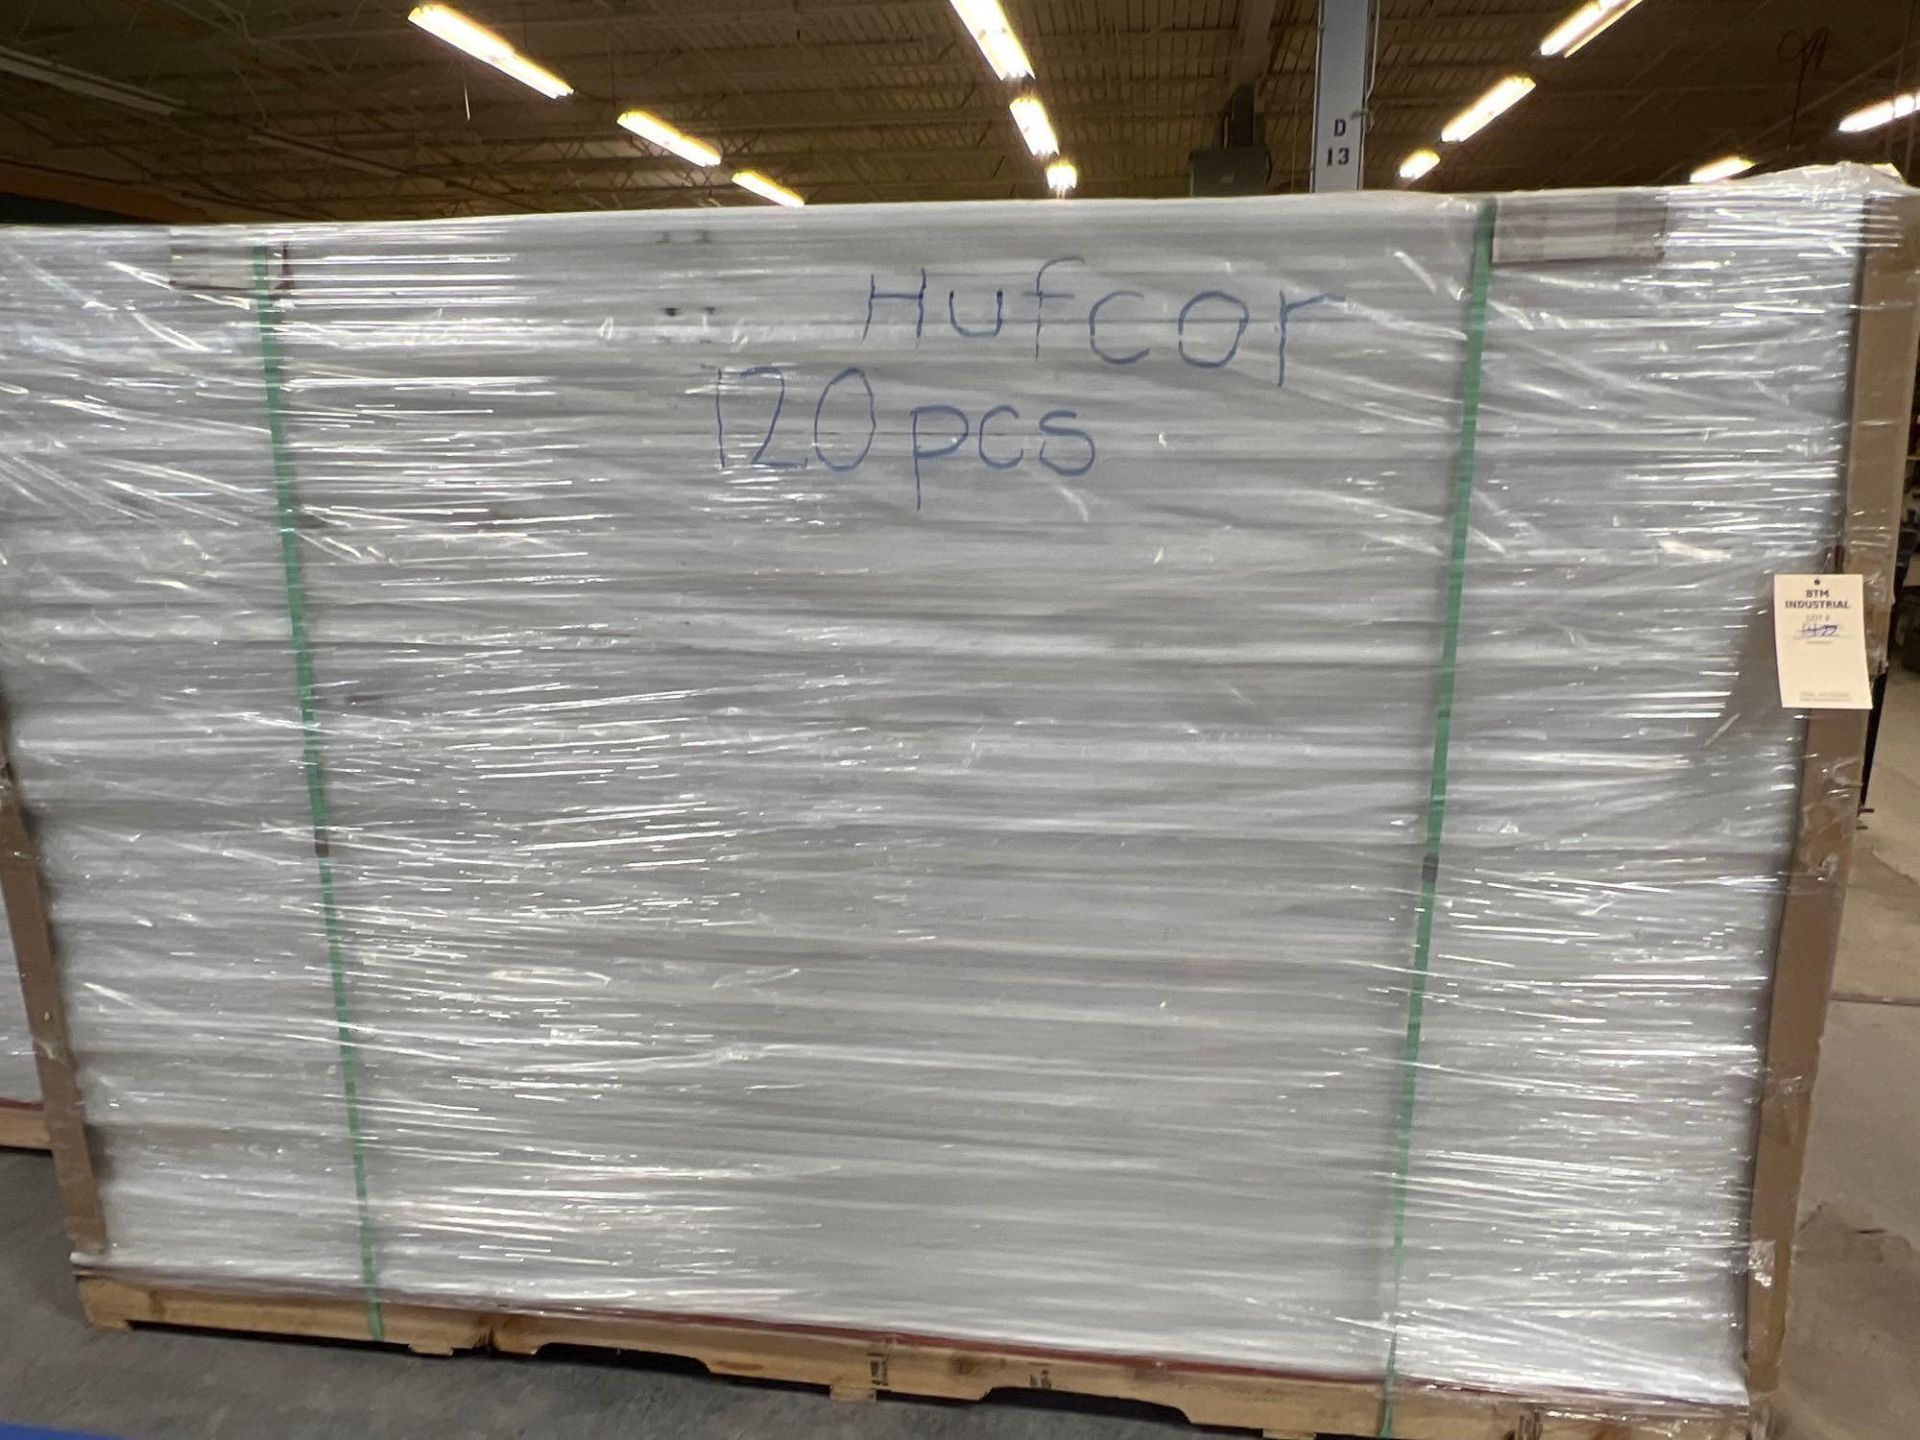 Hufcor Ecocore 120 Pieces